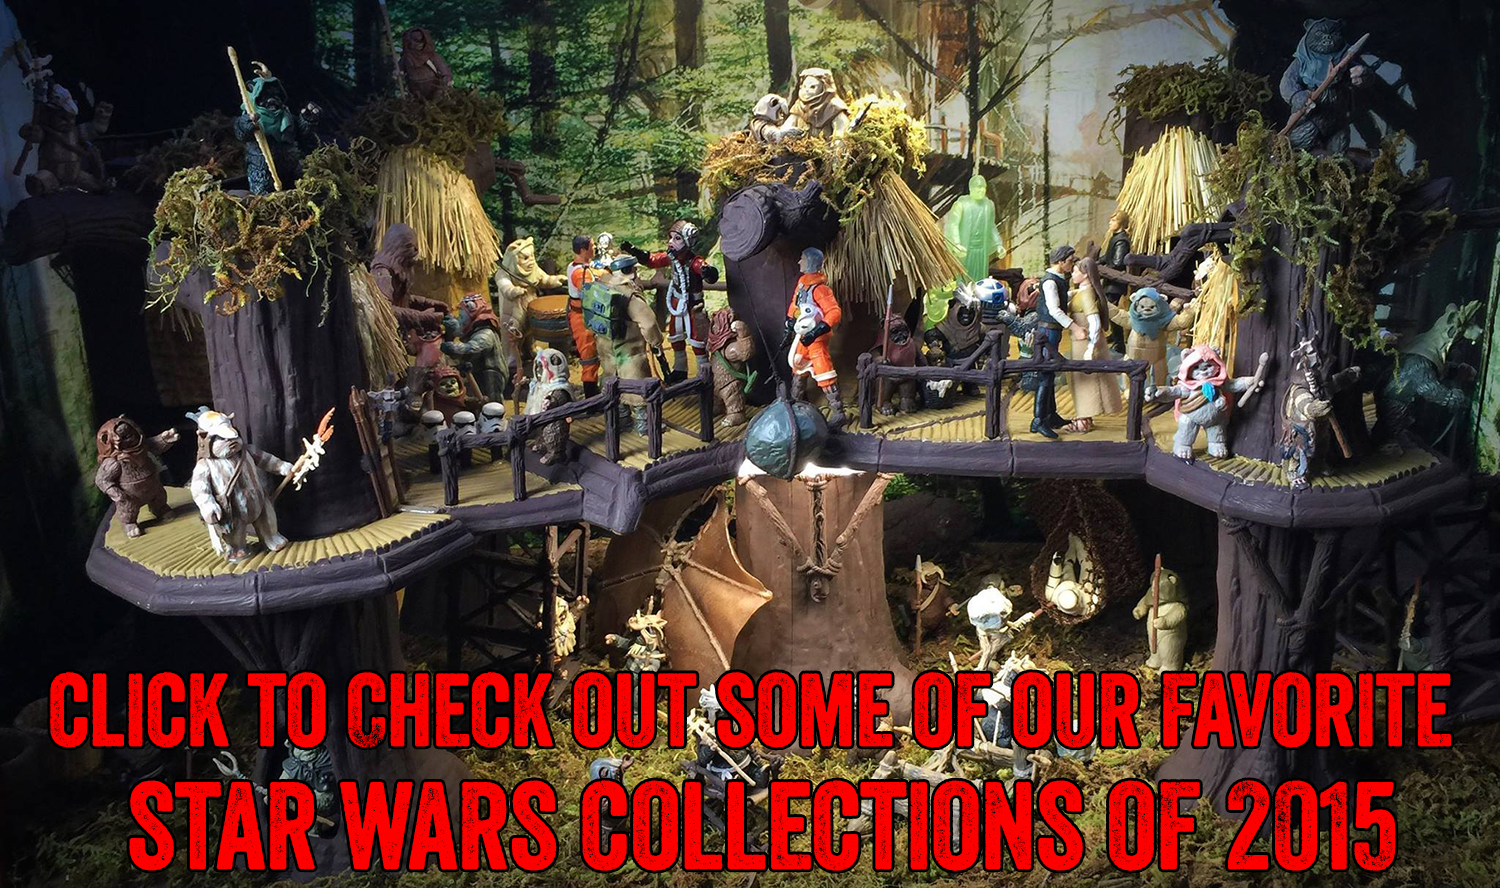 Top 2015 Star Wars Collections